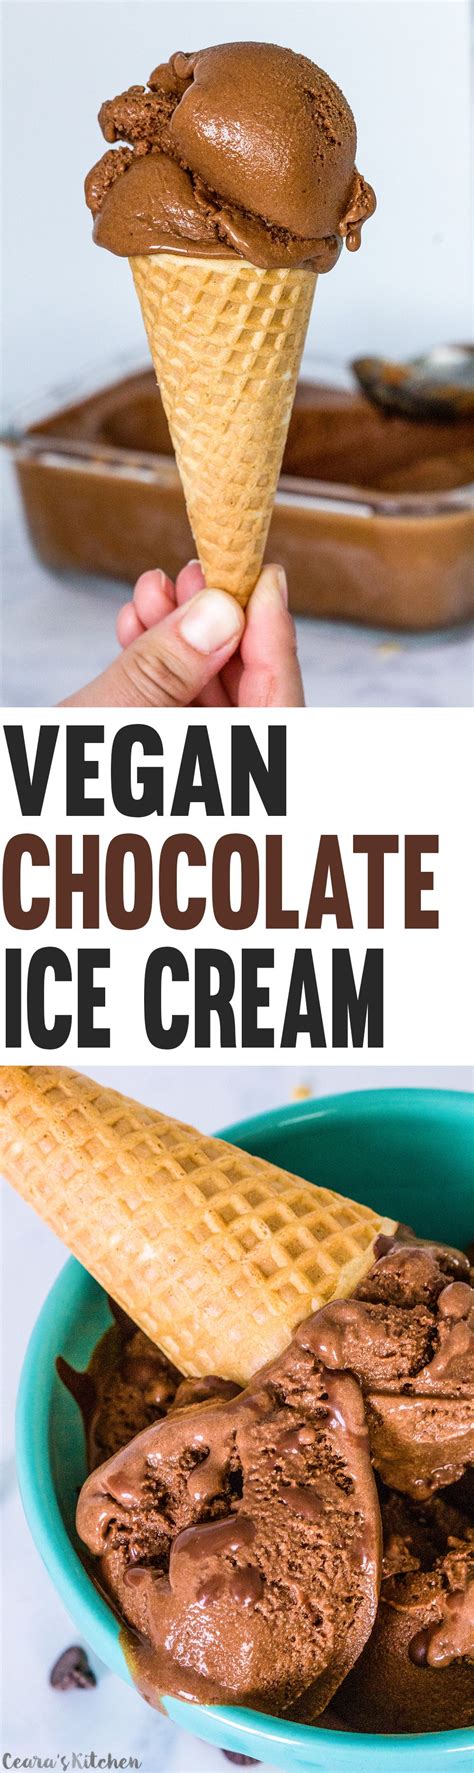 Vegan Chocolate Ice Cream Watch Out For Potential Gluten In Instant